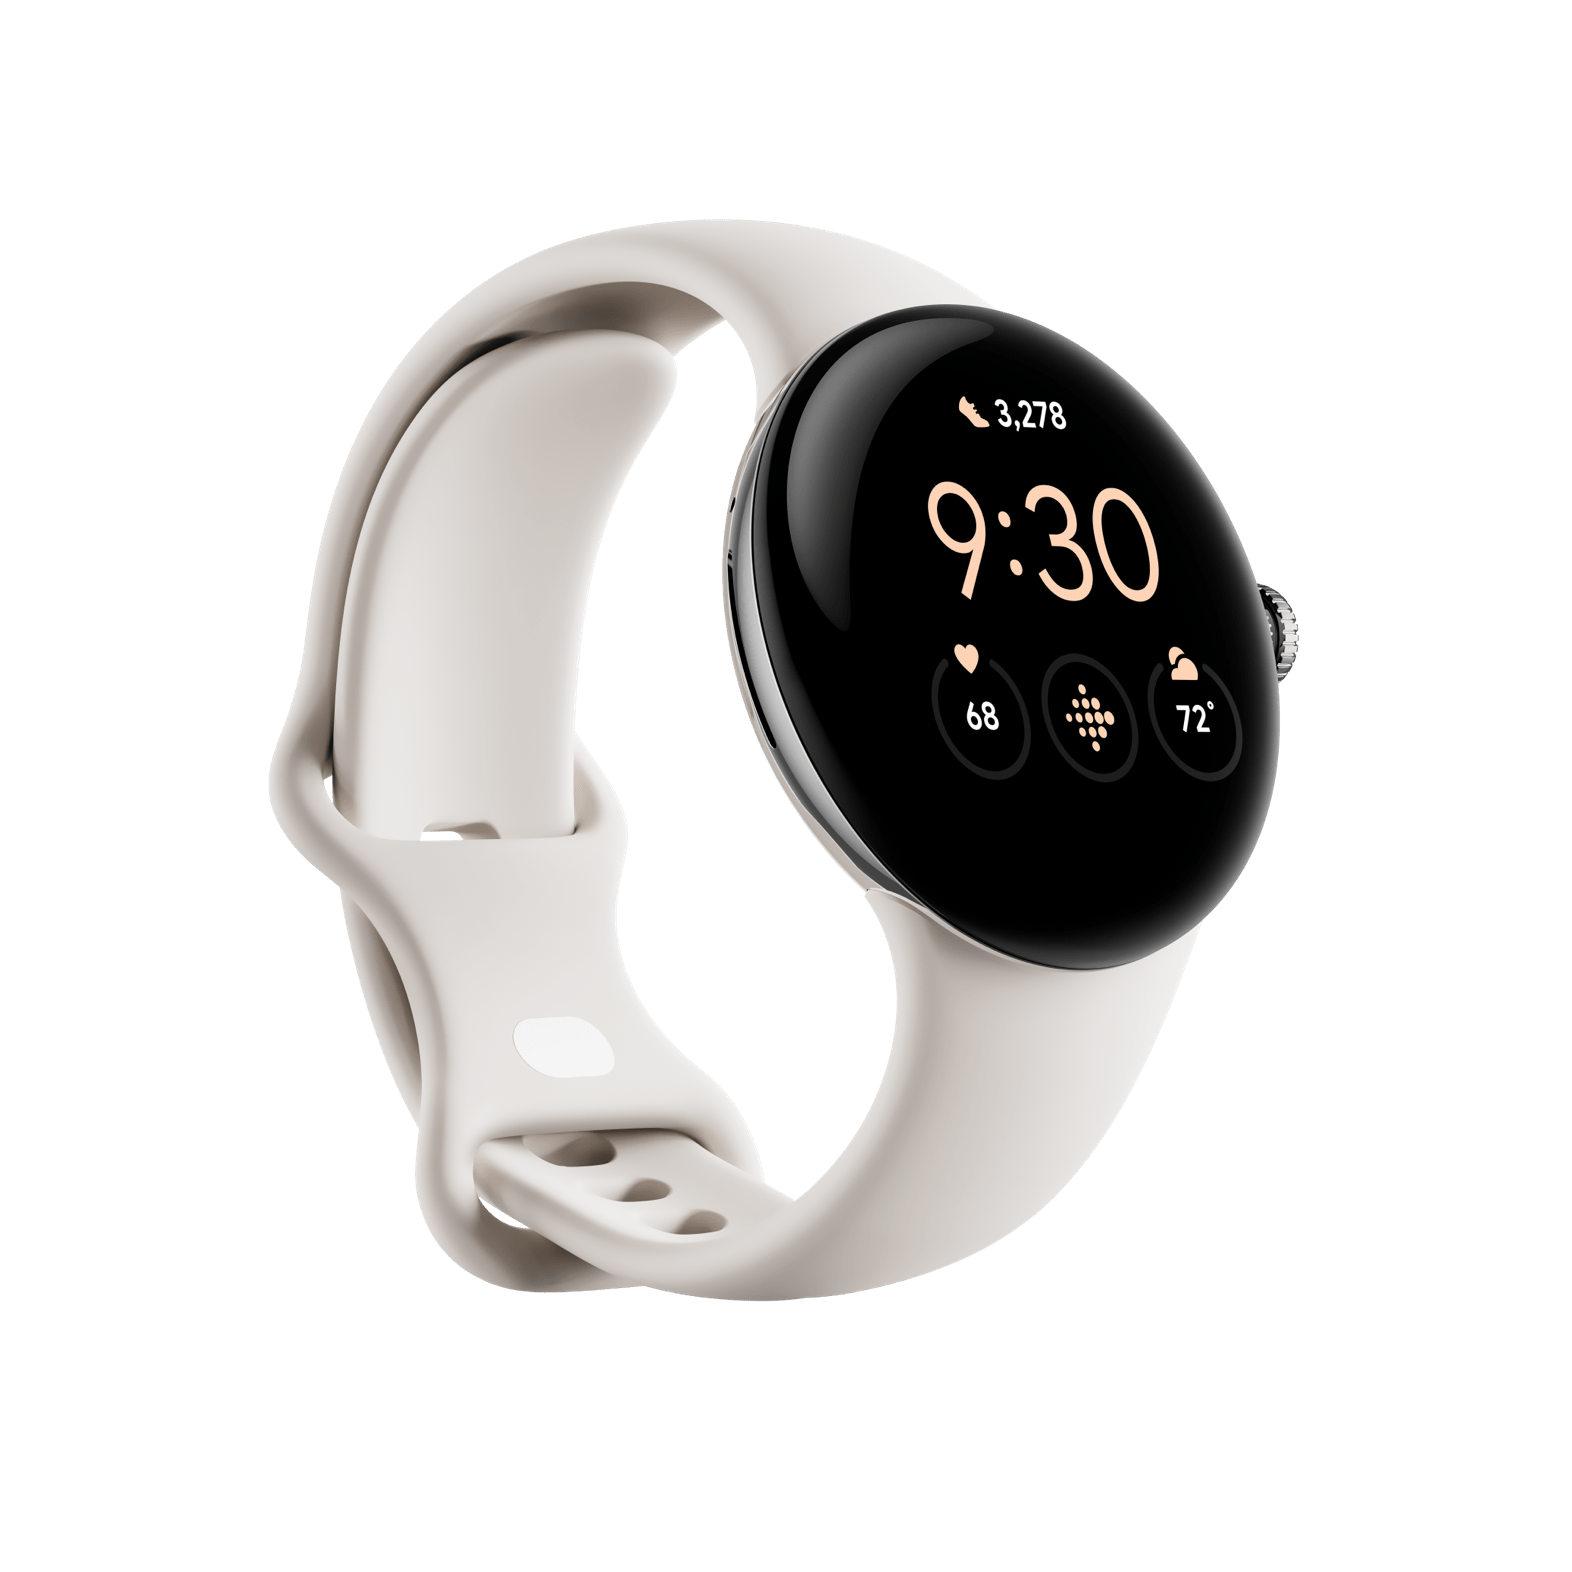 Google Pixel Watch 4G LTE + Bluetooth / Wi-Fi (Chalk / Polished Silver Stainless Steel)